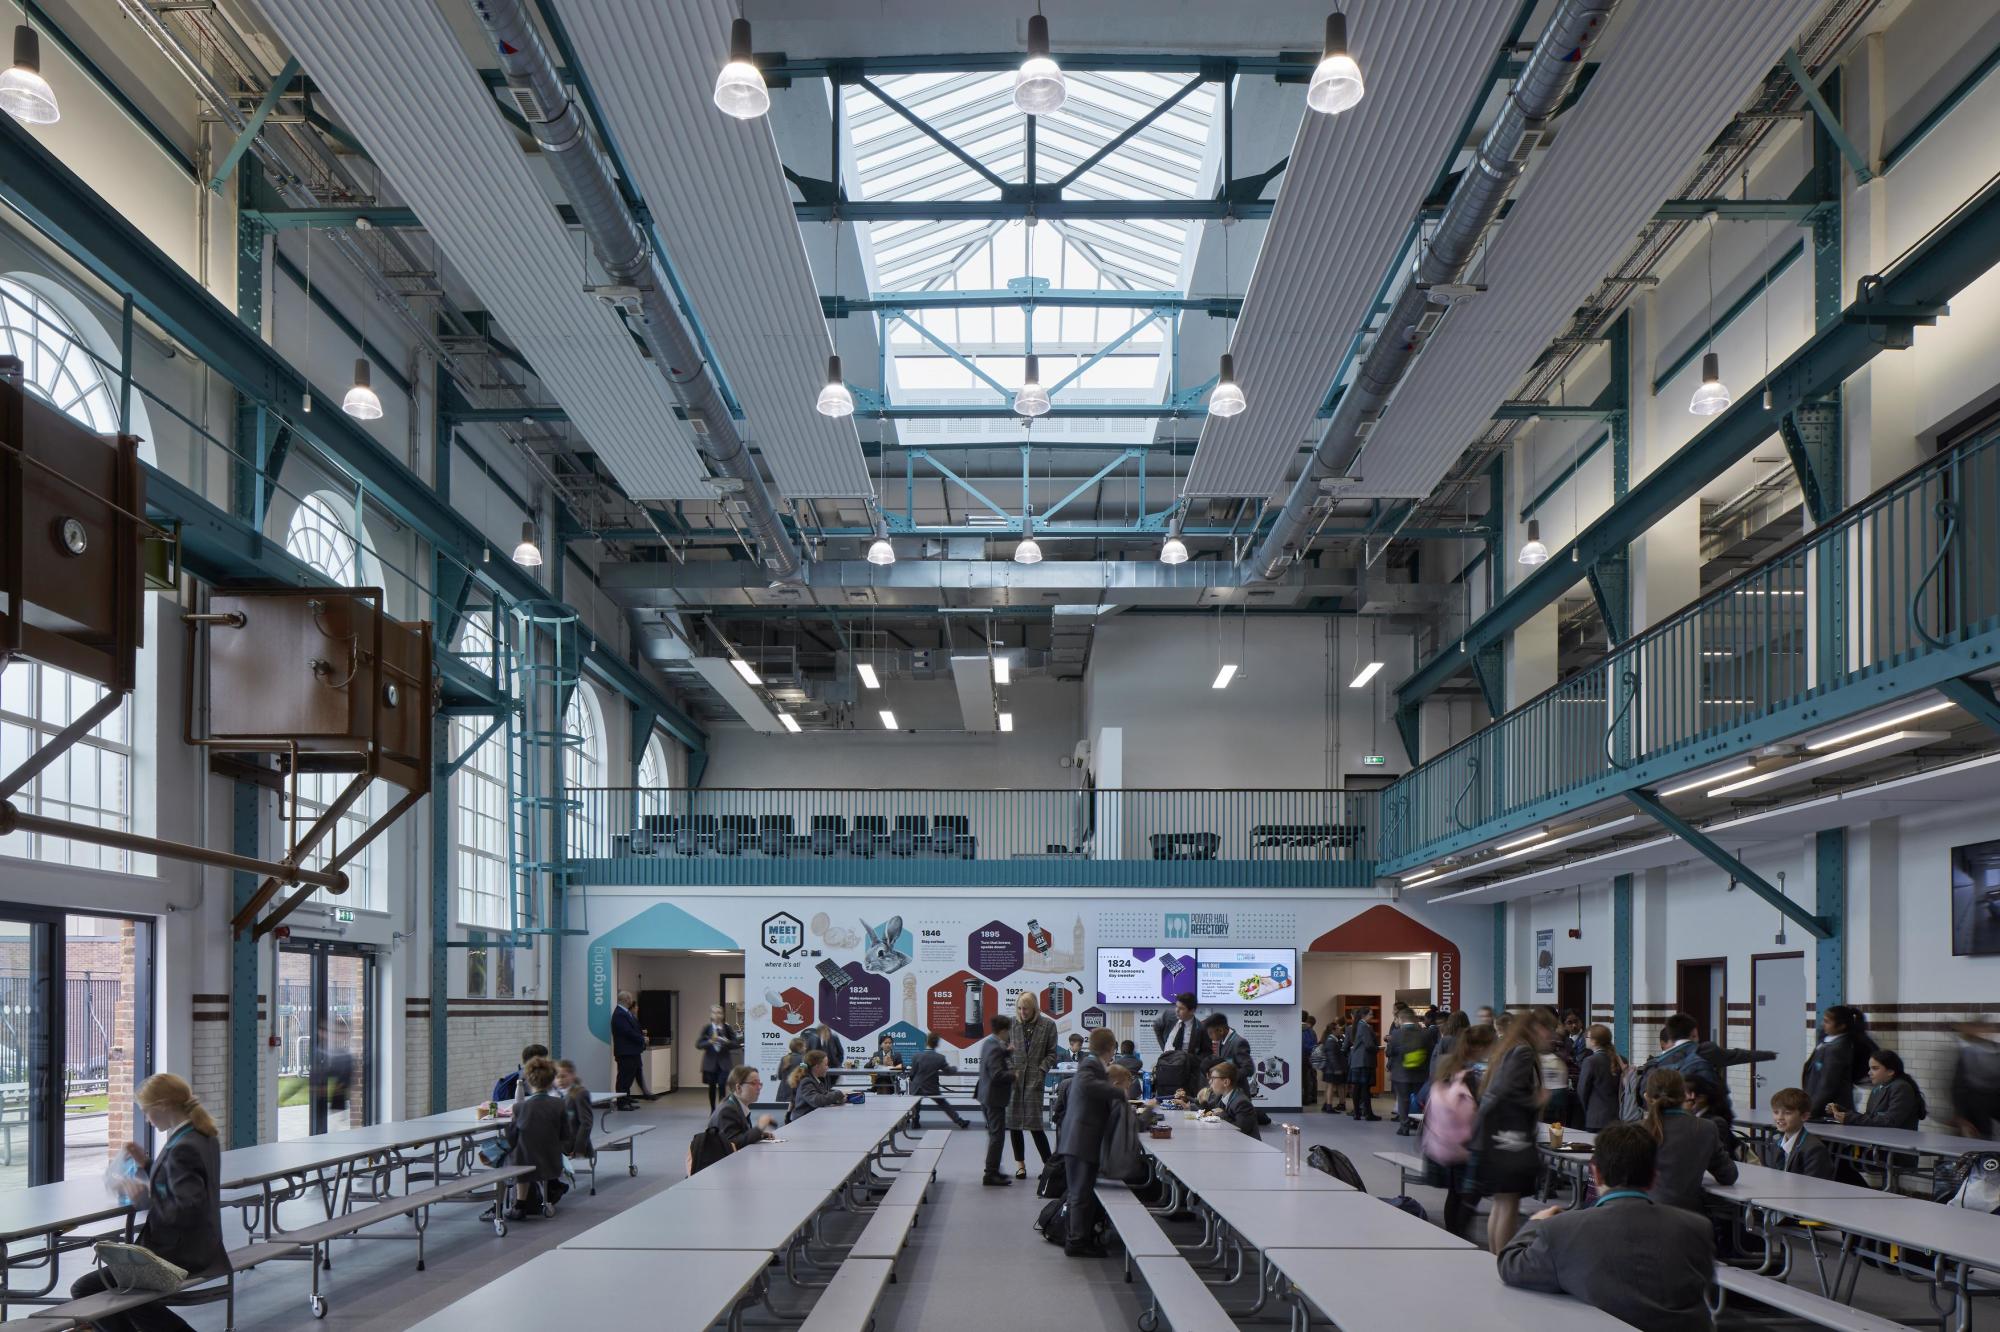 RIBA Launches Award for Best Reuse of Buildings